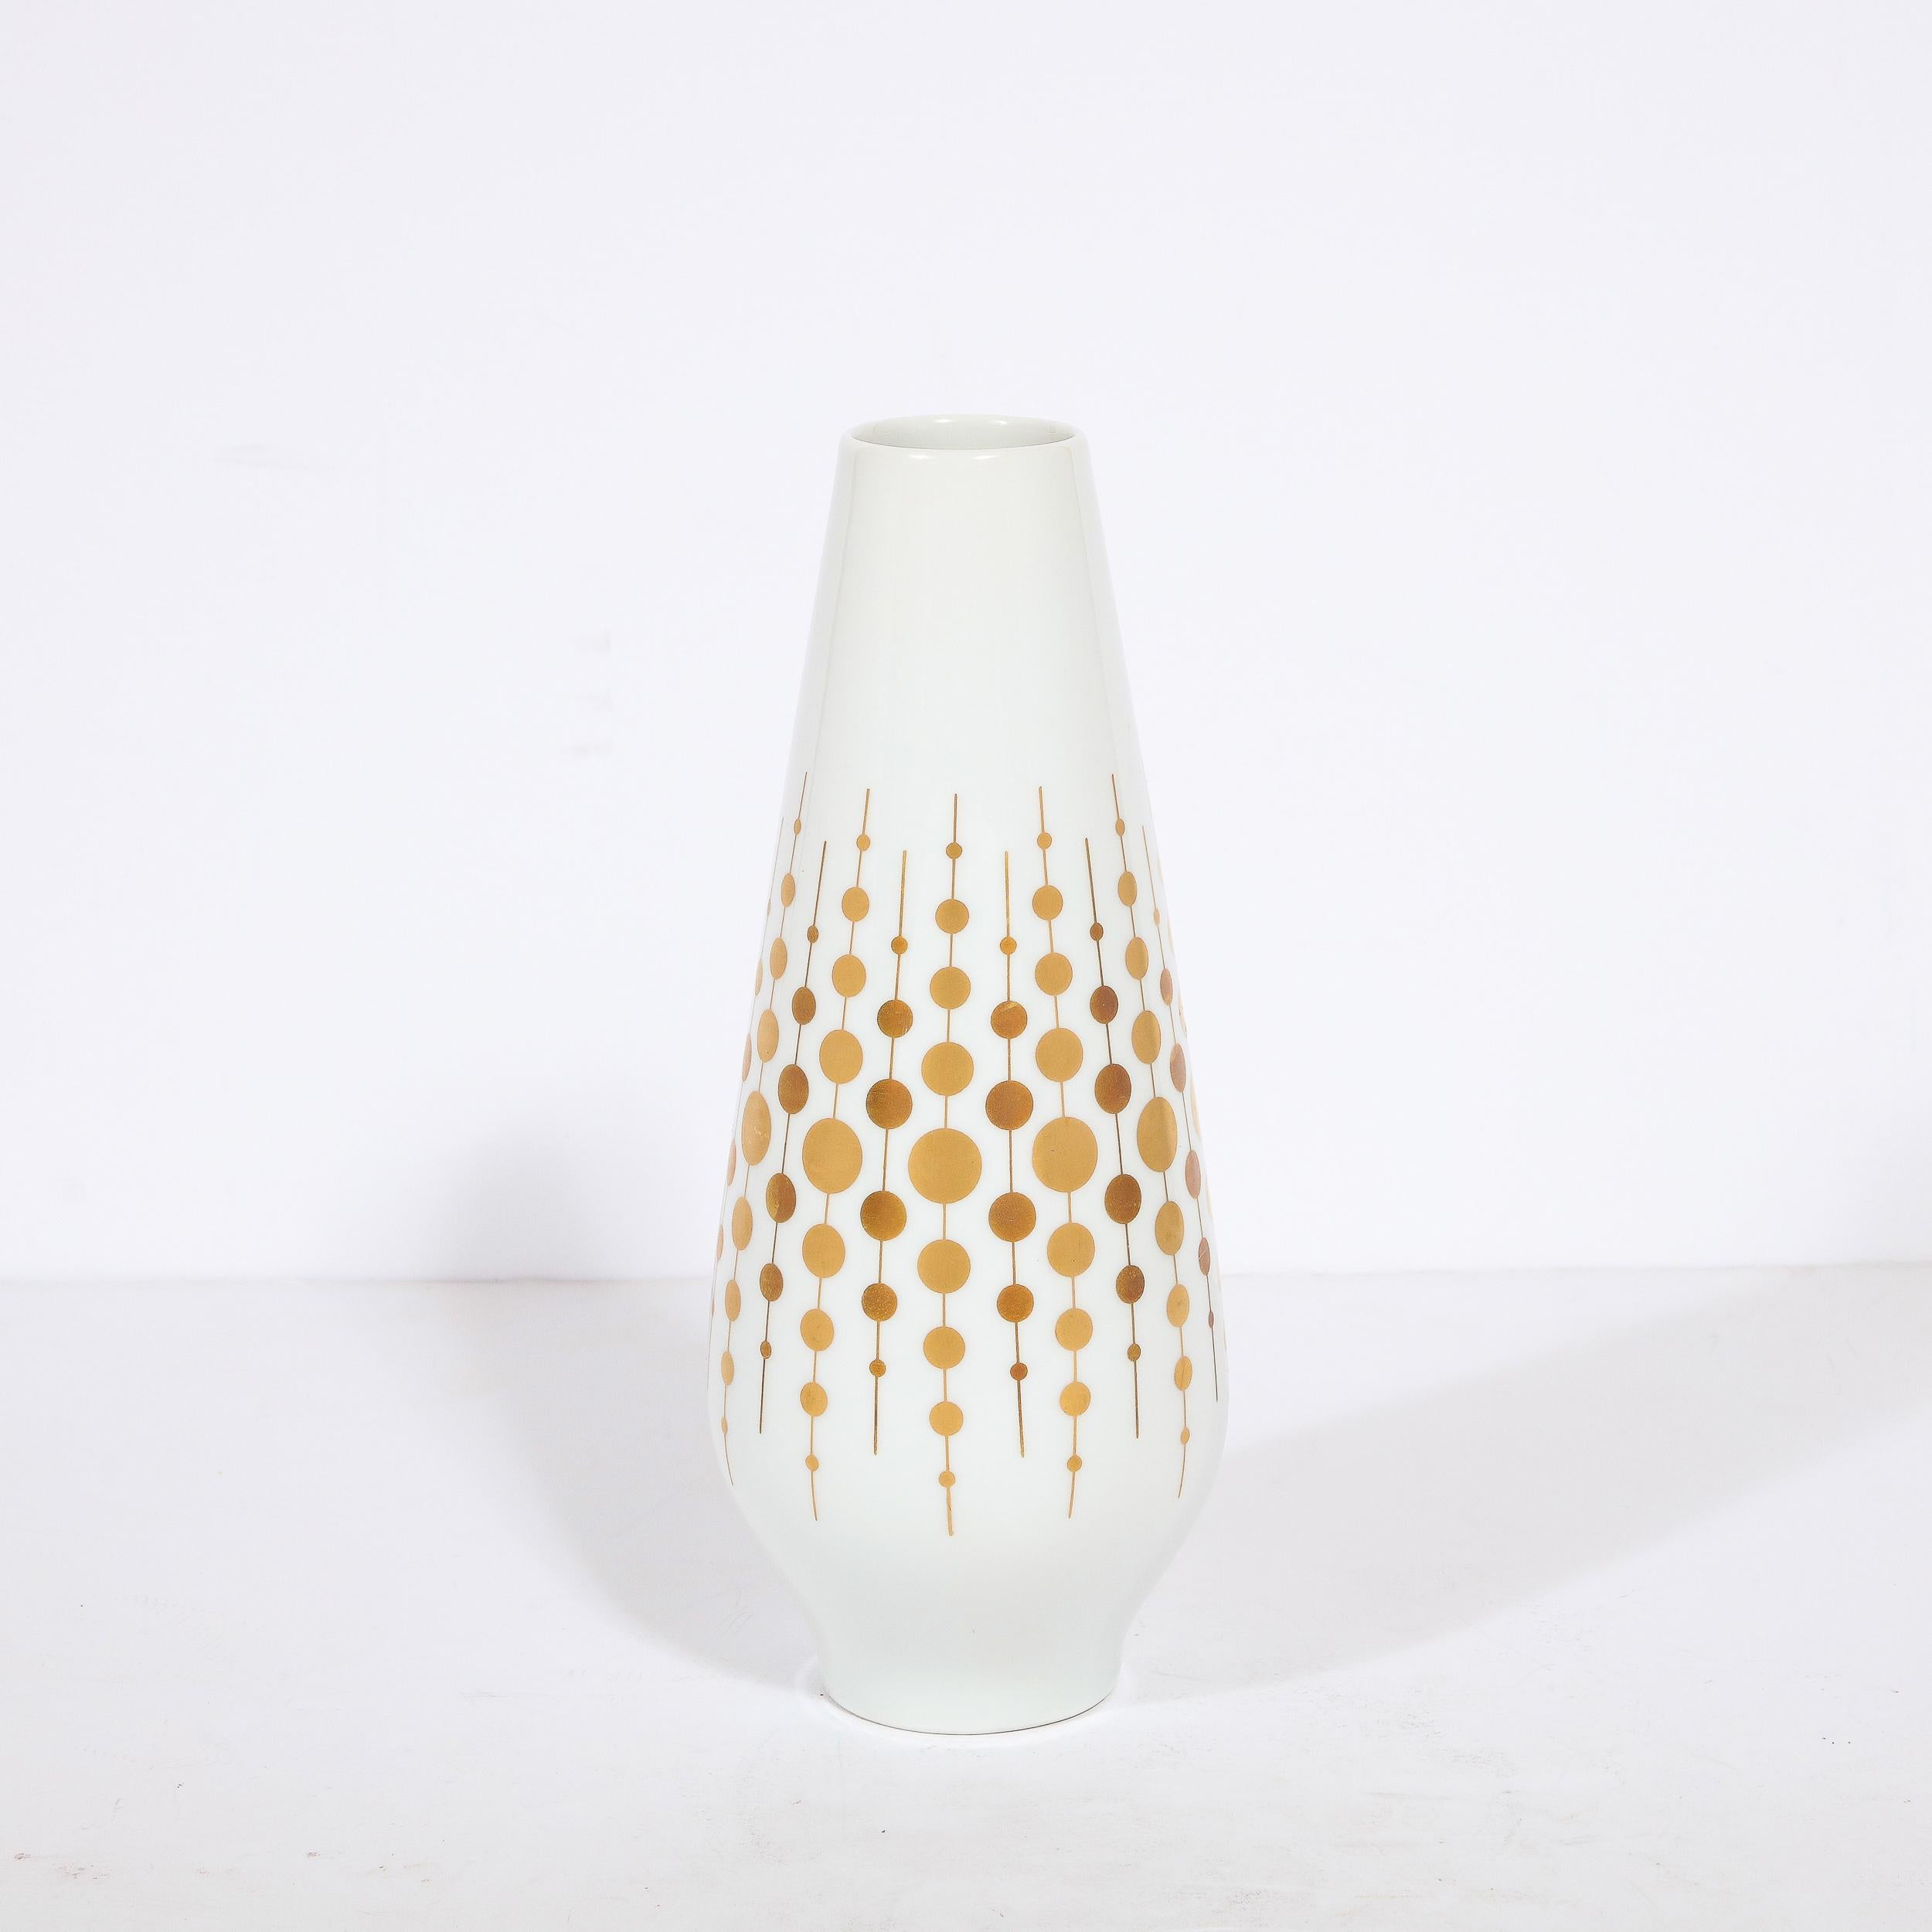 This refined Mid Century Modern porcelain vase was realized by the esteemed maker Alka Kunst in Germany circa 1960. It features a cylindrical body in white porcelain that flares subtly from its circular base then tapering to a round mouth. The